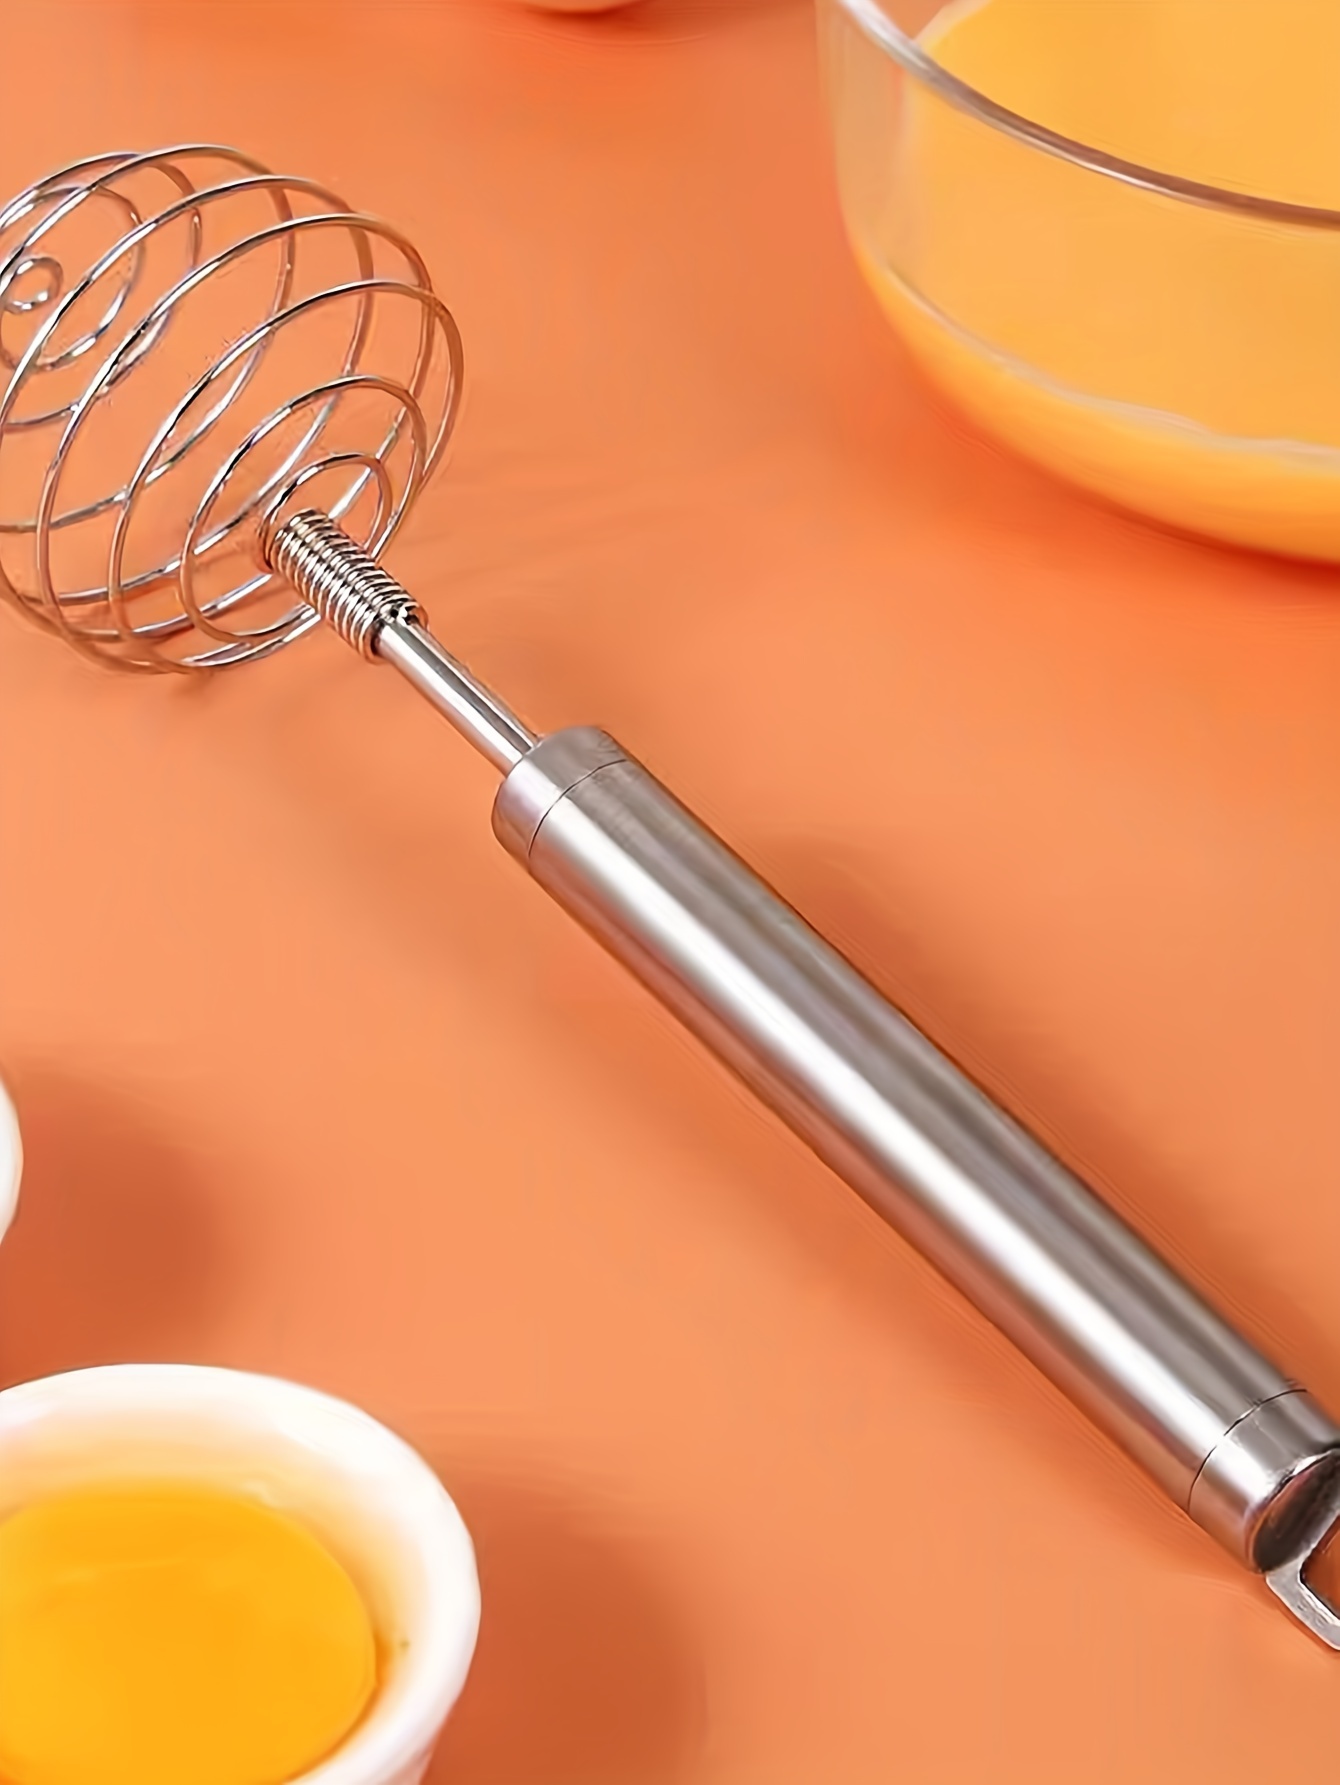 Bullpiano Mini Whisk Wisk Kitchen Tool Cool Whip Egg Beater Cooking  Utensils Heavy Whipping Cream Whipped Cream Cheese Small Whisk Wire Whisk  Set Wisk Kitchen Tool Kitchen Whisks for Cooking, Blending 